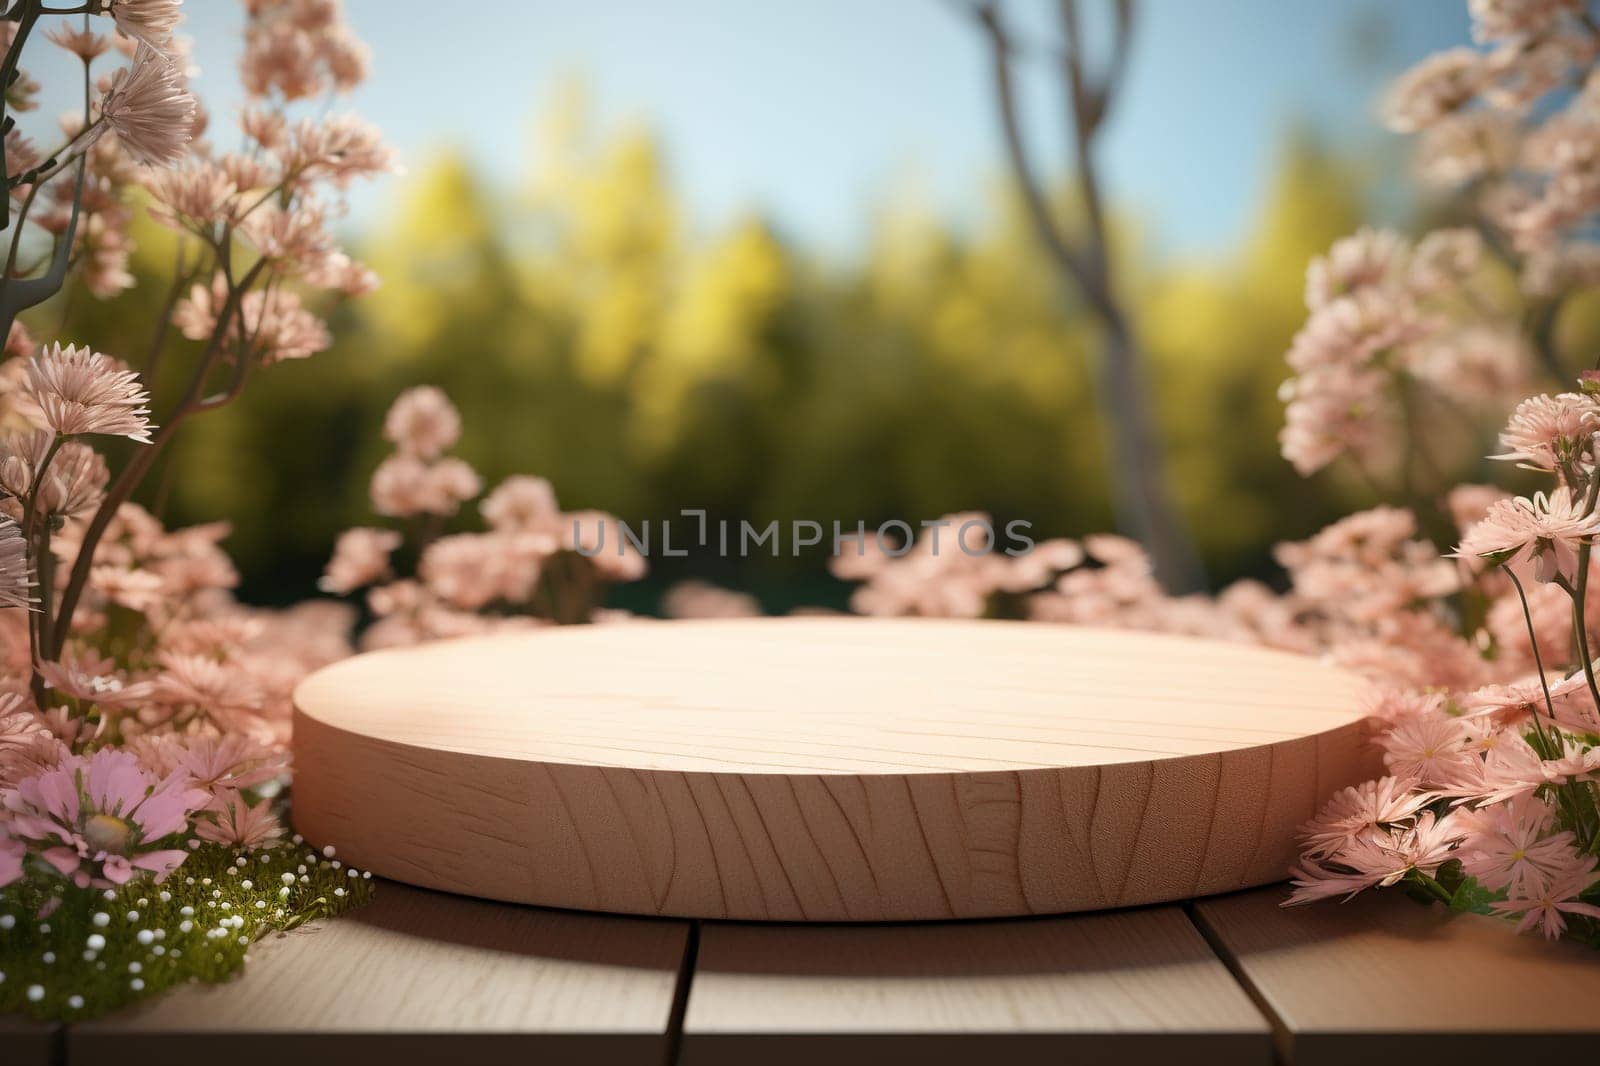 Wooden podium in nature with flowers. Blurred nature background. Stand for placing natural products.